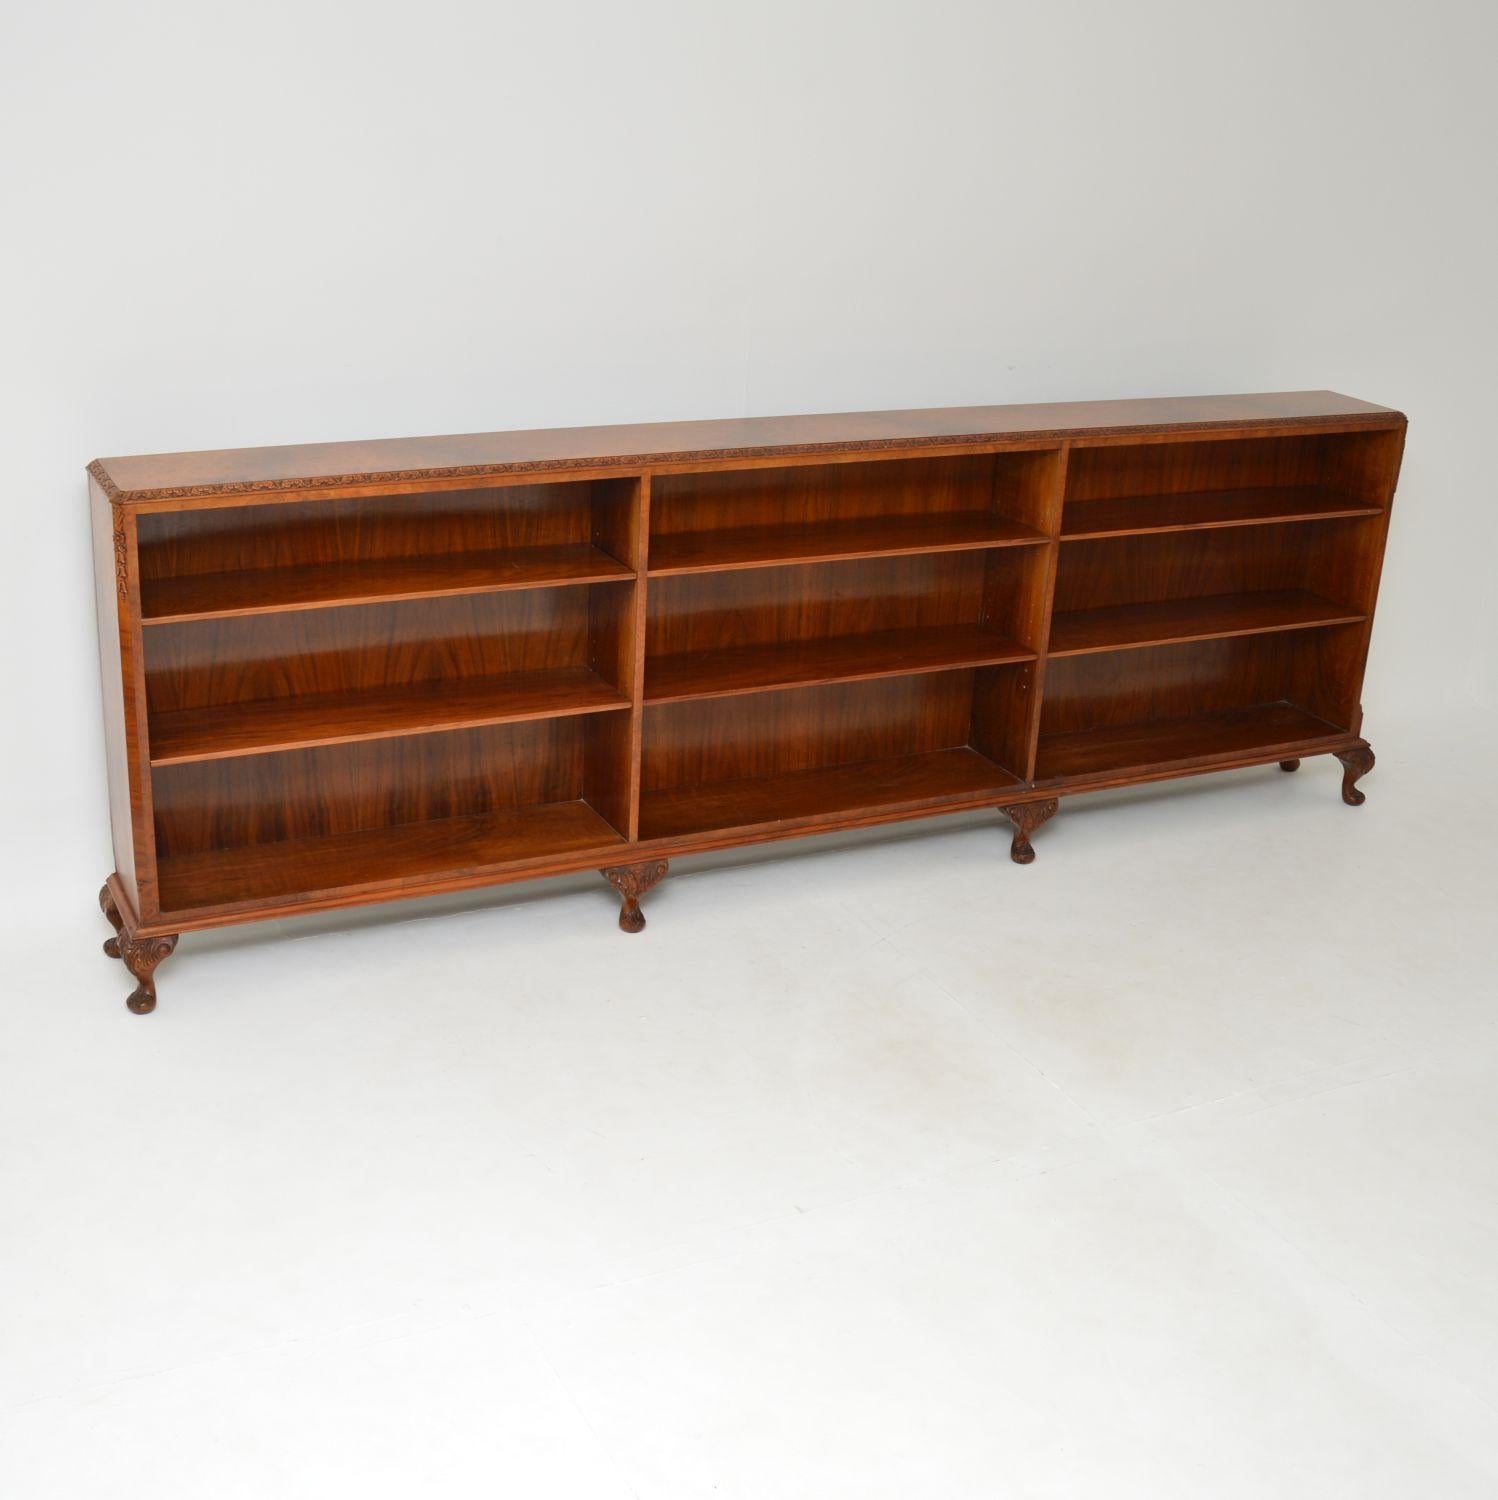 A very long and impressive antique open bookcase in burr walnut. This was made in England, it is in the Queen Anne style and dates from around the 1930’s.

The quality is superb, with fine and crisp carving on the cabriole legs, all along the top